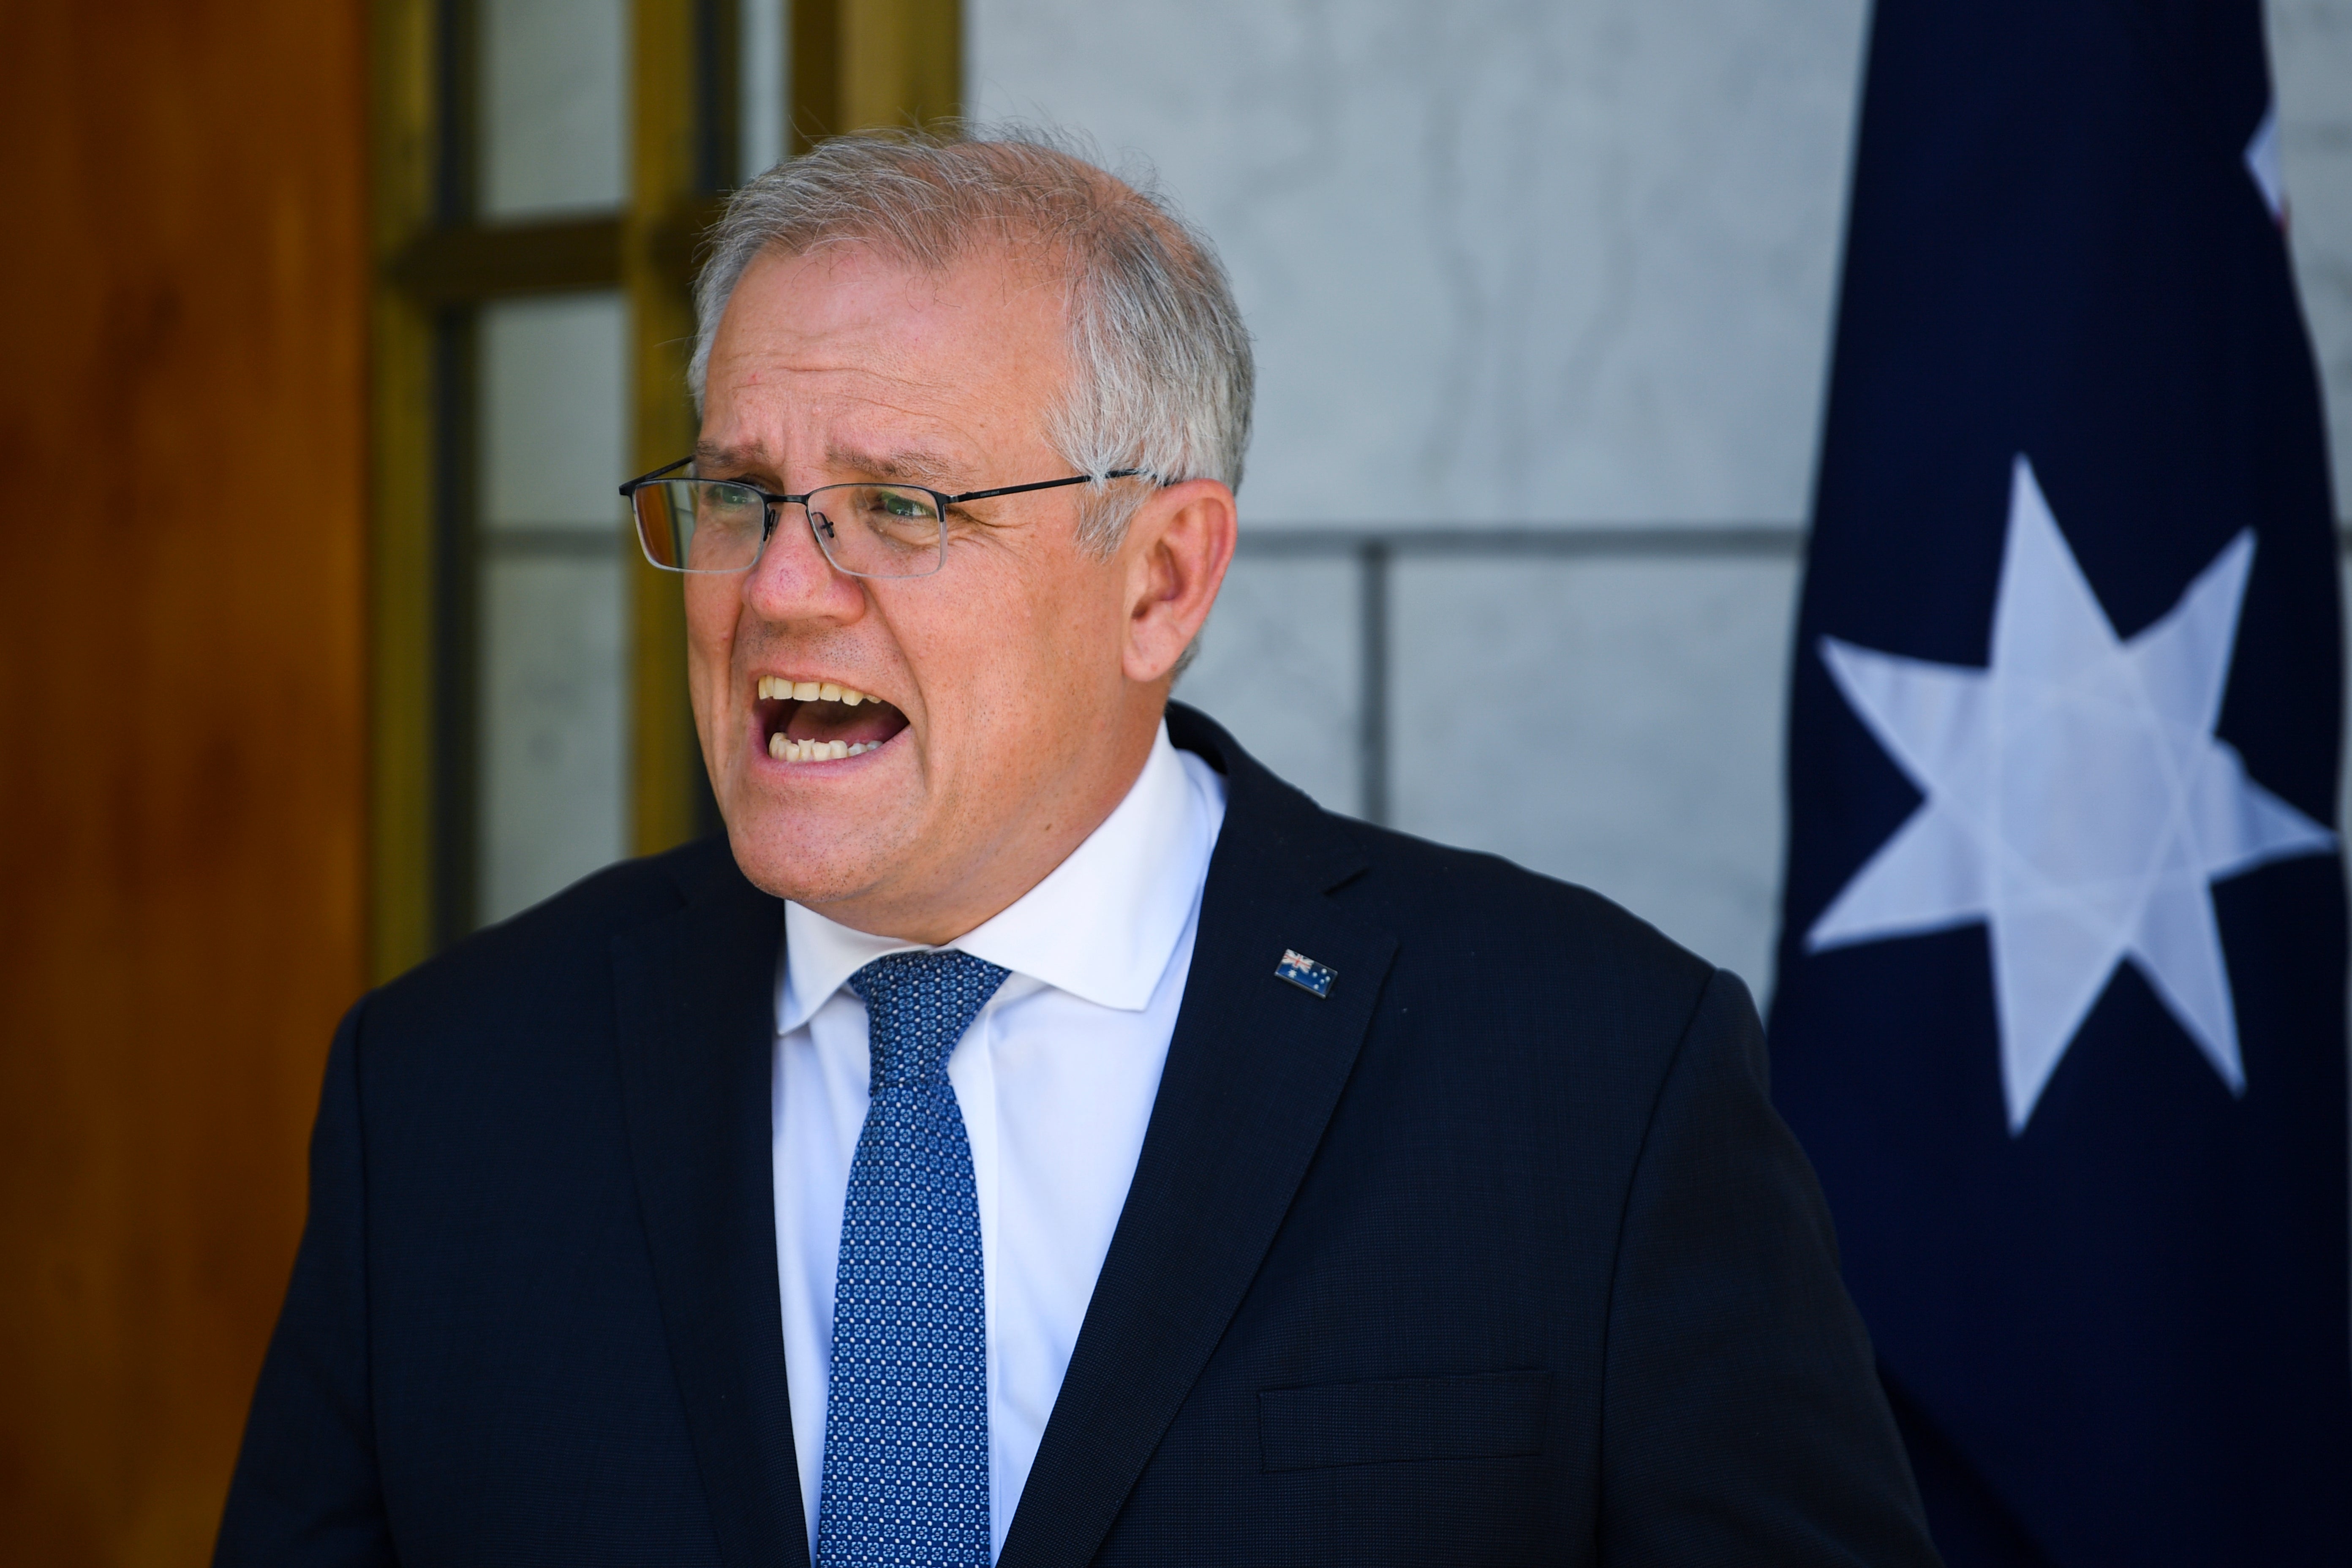 The Scott Morrison government has announced a settlement of £1.1m for the ‘racist’ welfare scheme